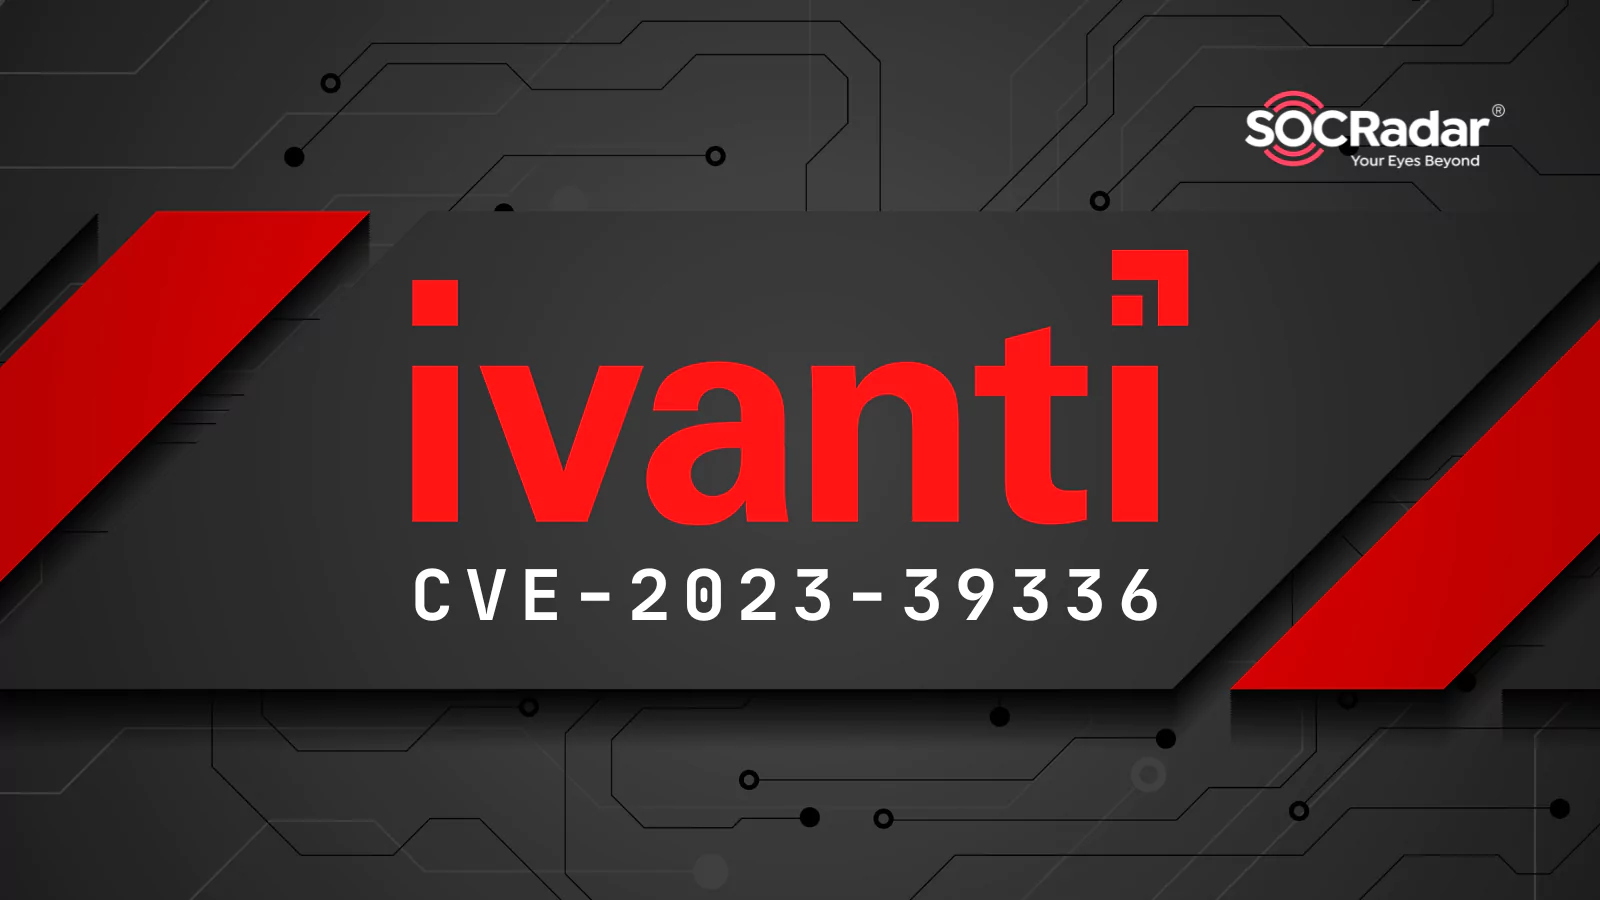 SOCRadar® Cyber Intelligence Inc. | Ivanti Released a Patch in Endpoint Manager Solution (EPM) for a Critical Vulnerability, CVE-2023-39336